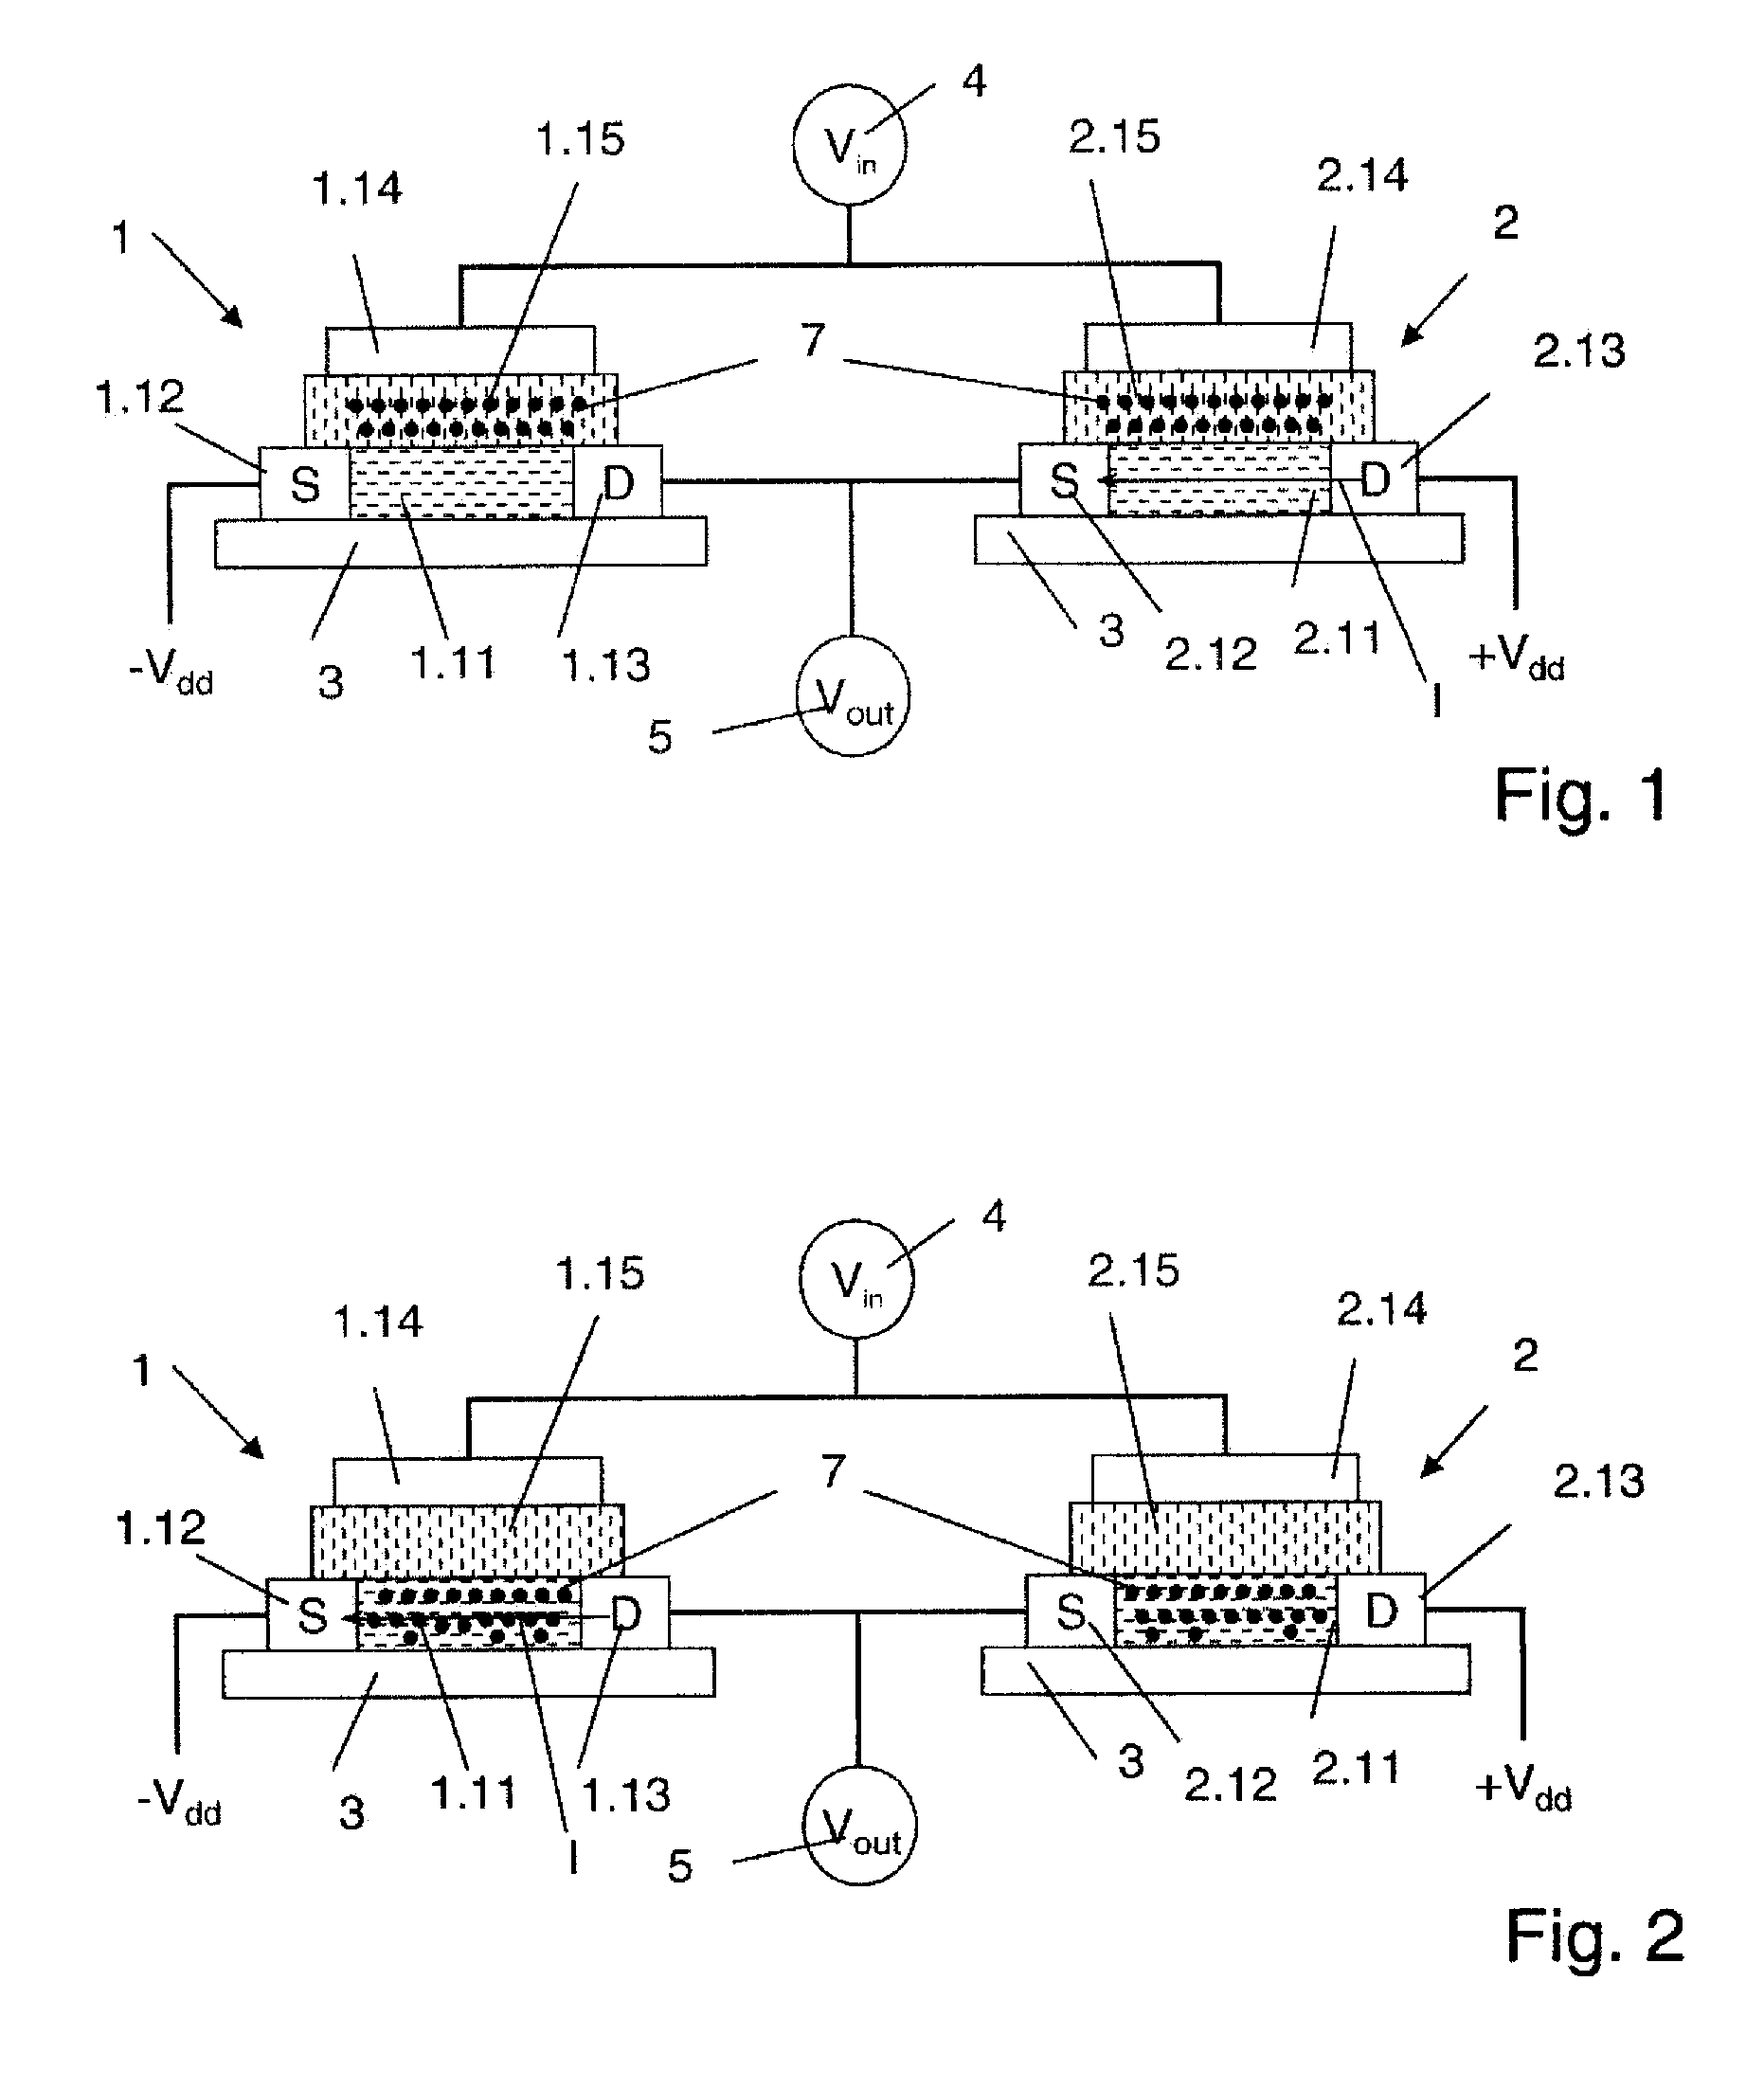 Logic element, and integrated circuit or field programmable gate array